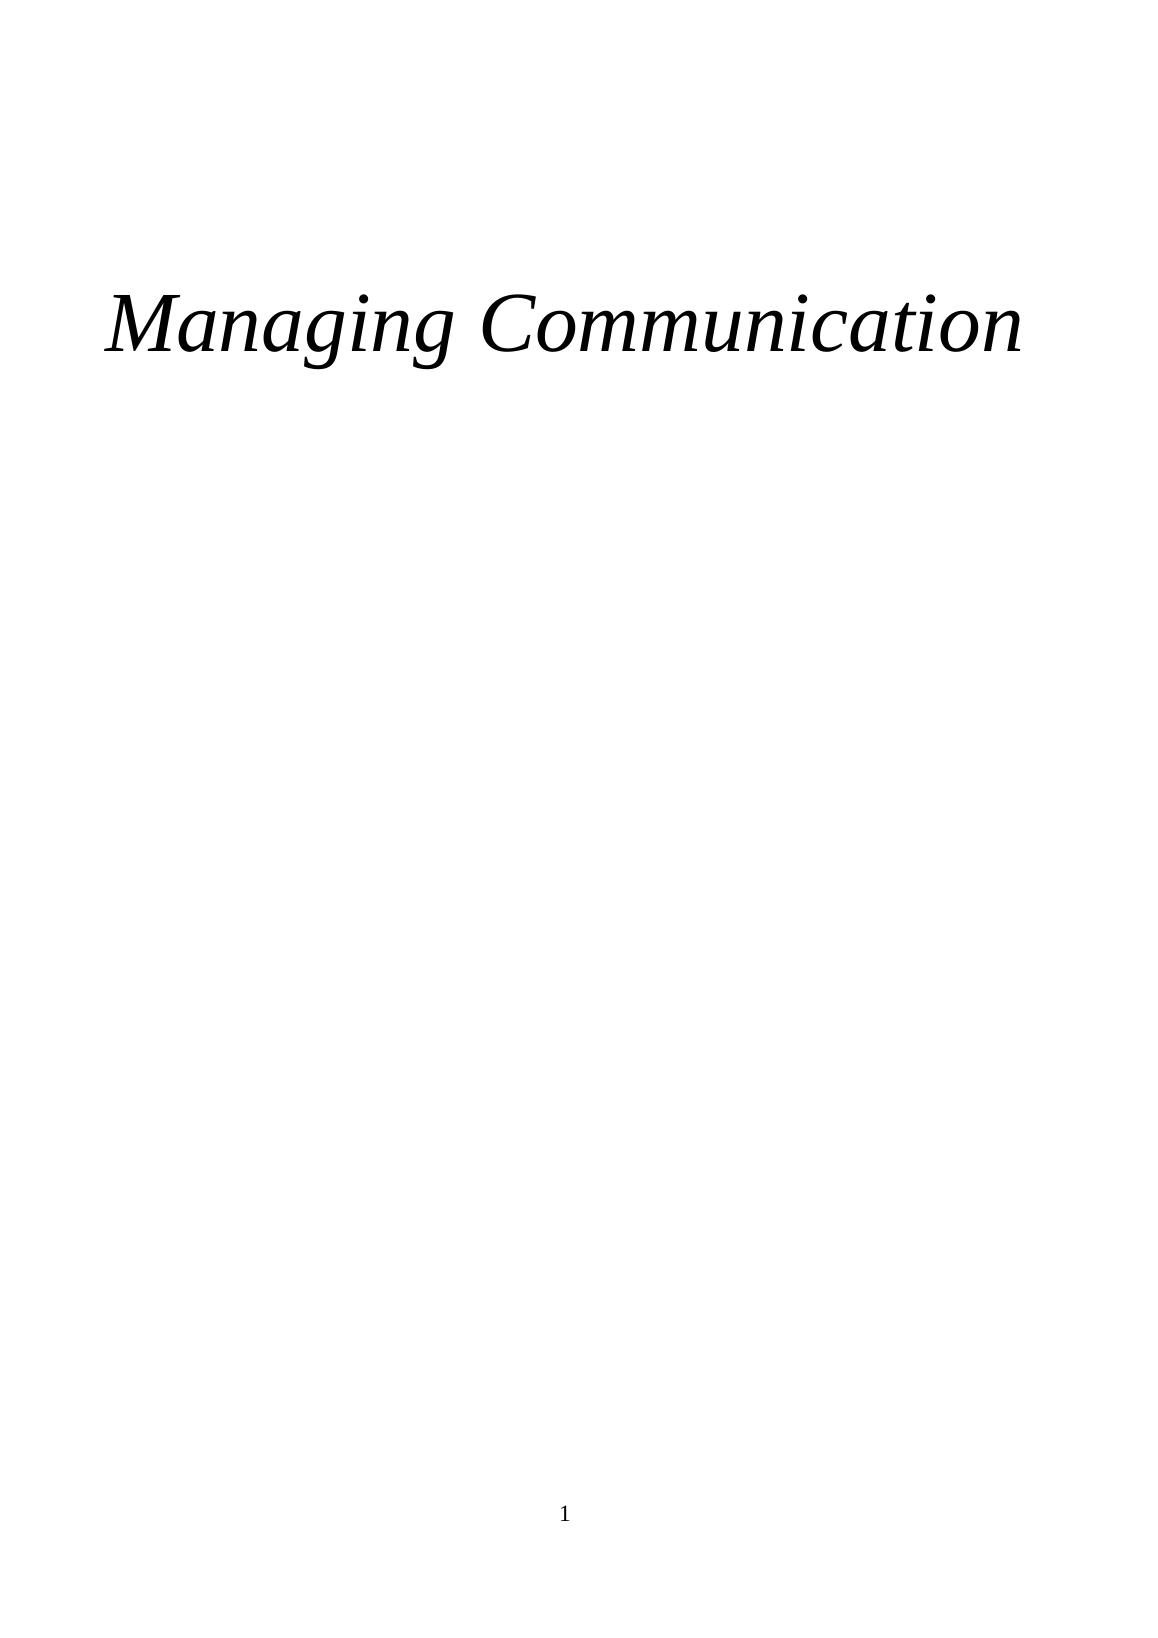 Google UK Managing Communication INTRODUCTION 3 ASSIGNMENT 1 3 1.1 The range of decisions to take for enlargement project of google in UK 3 1.2 The internal and external sources of information and und_1